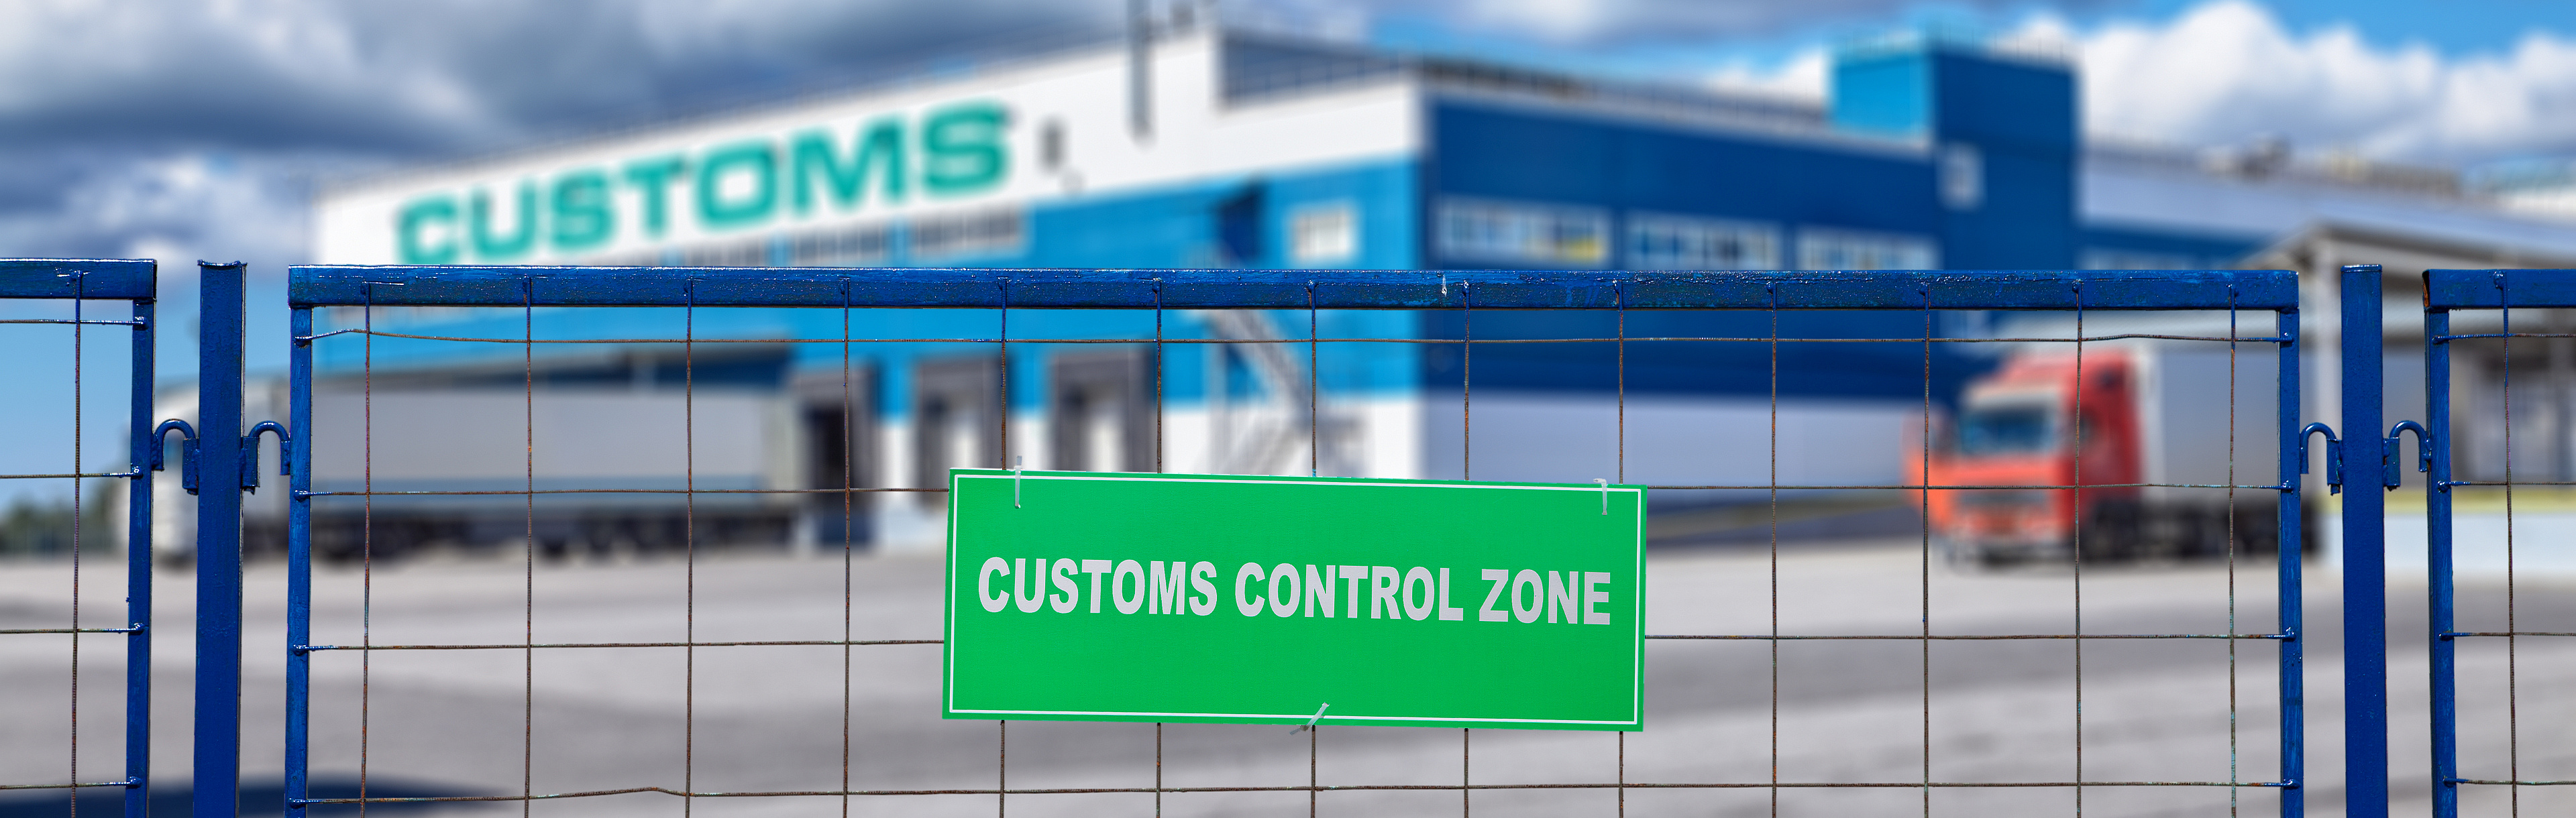 A fence with a sign that says "Customs Control Zone". A check-in area can be seen blurred in the background